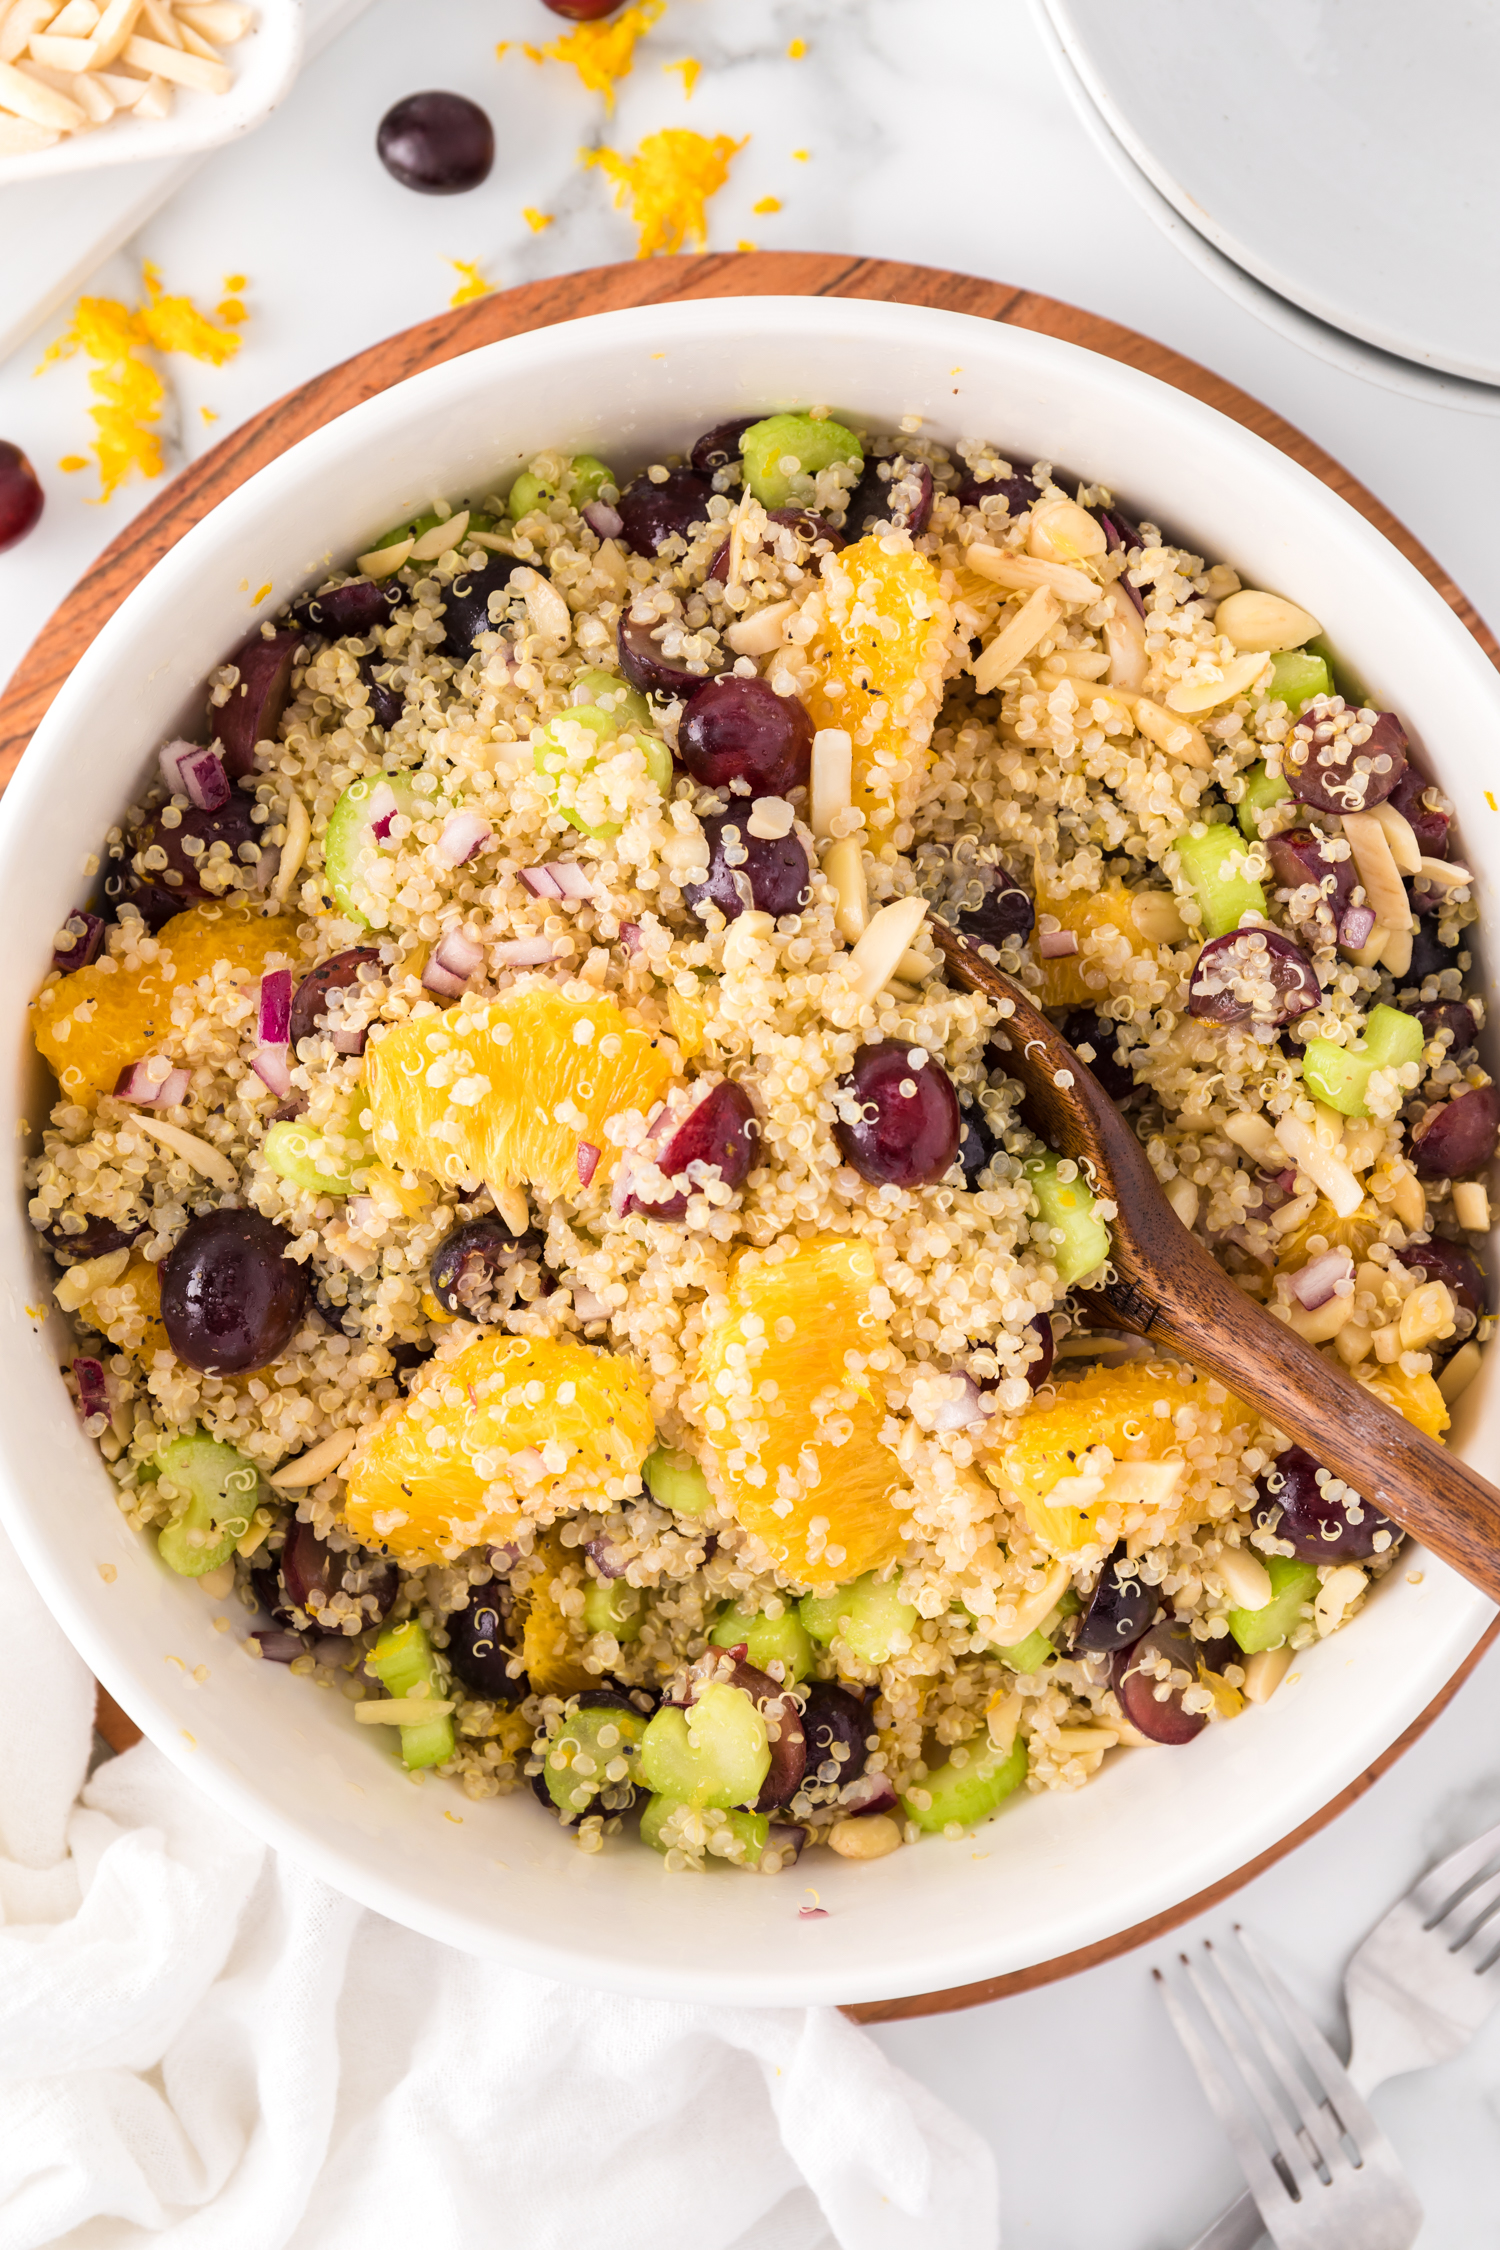 Quinoa salad in a large bowl, with oranges, grapes, almonds.